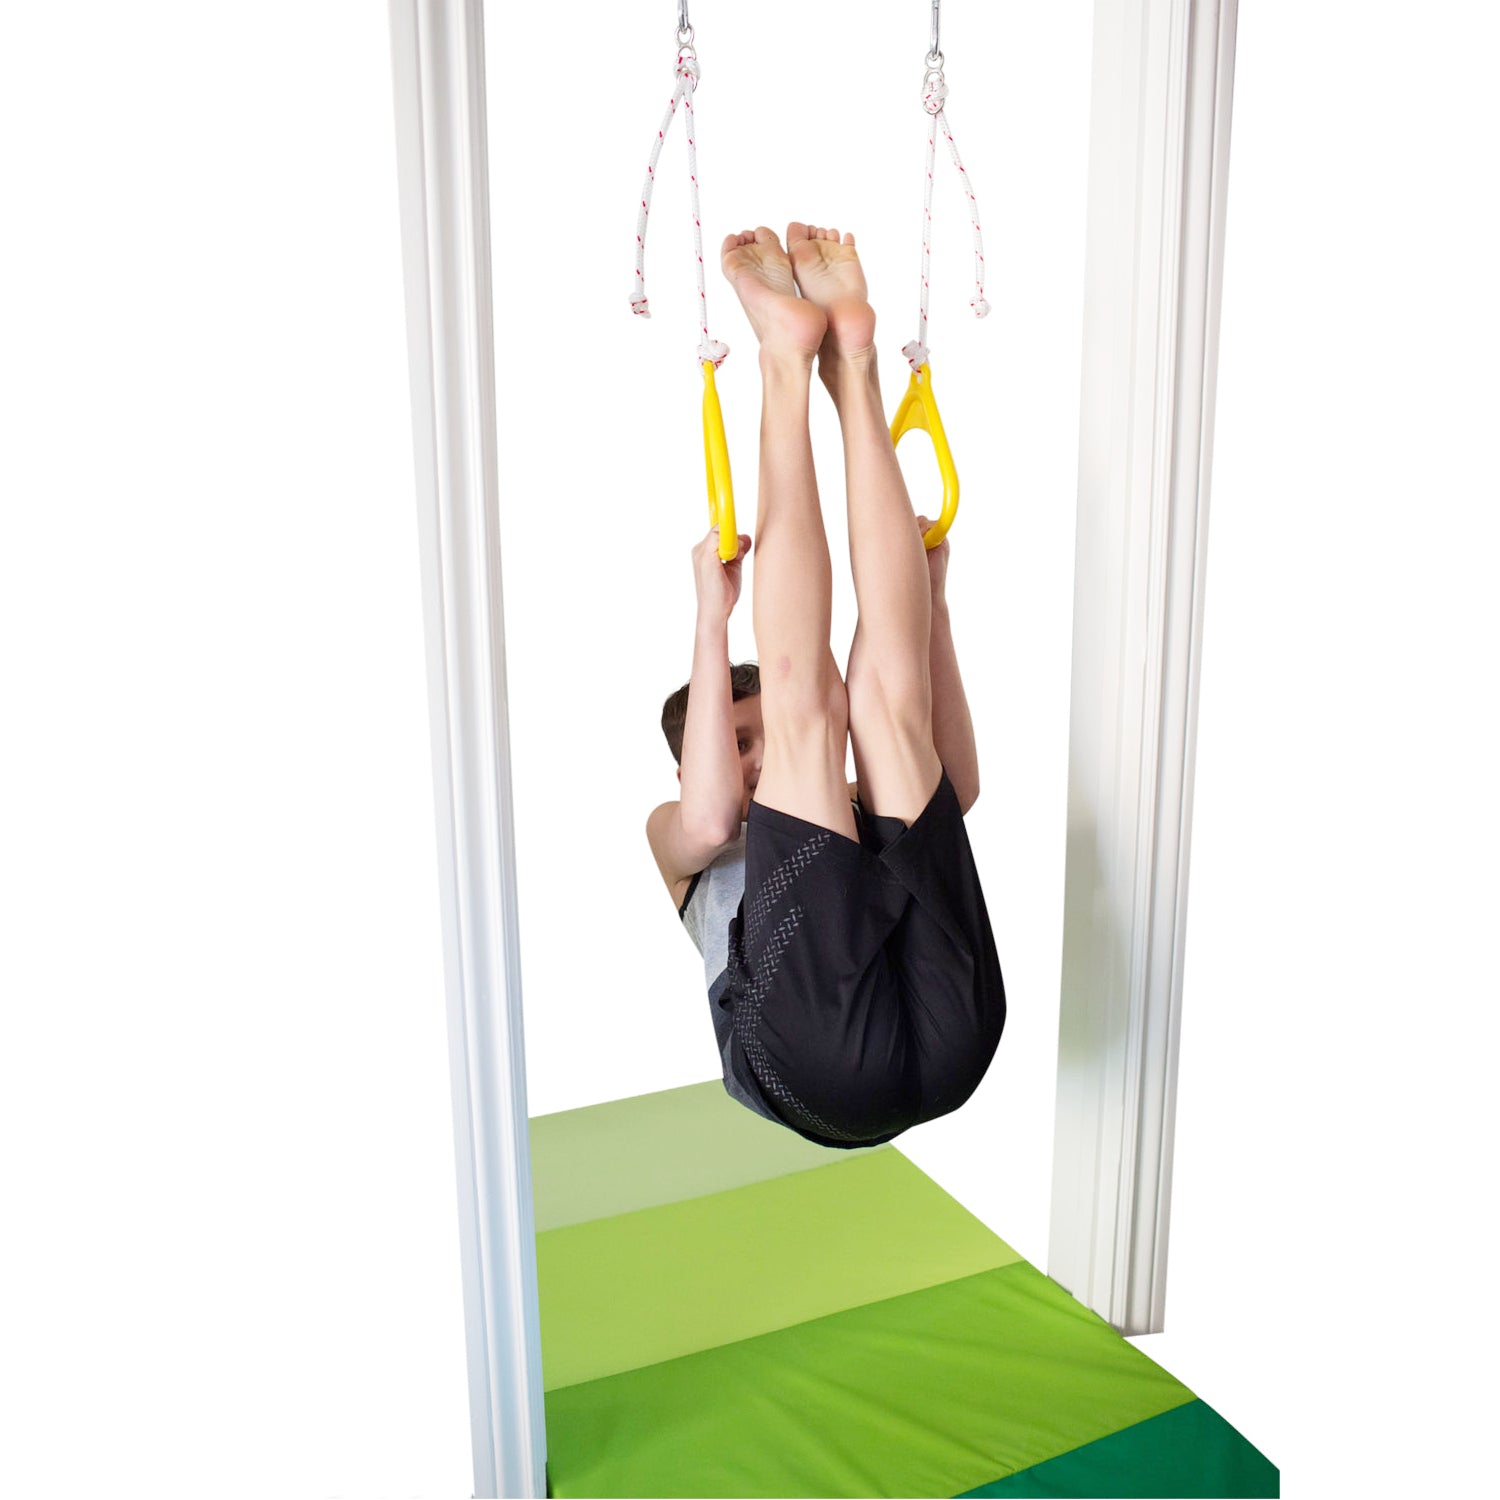 Gymnastics Rings for Kids - Red - DreamGYM